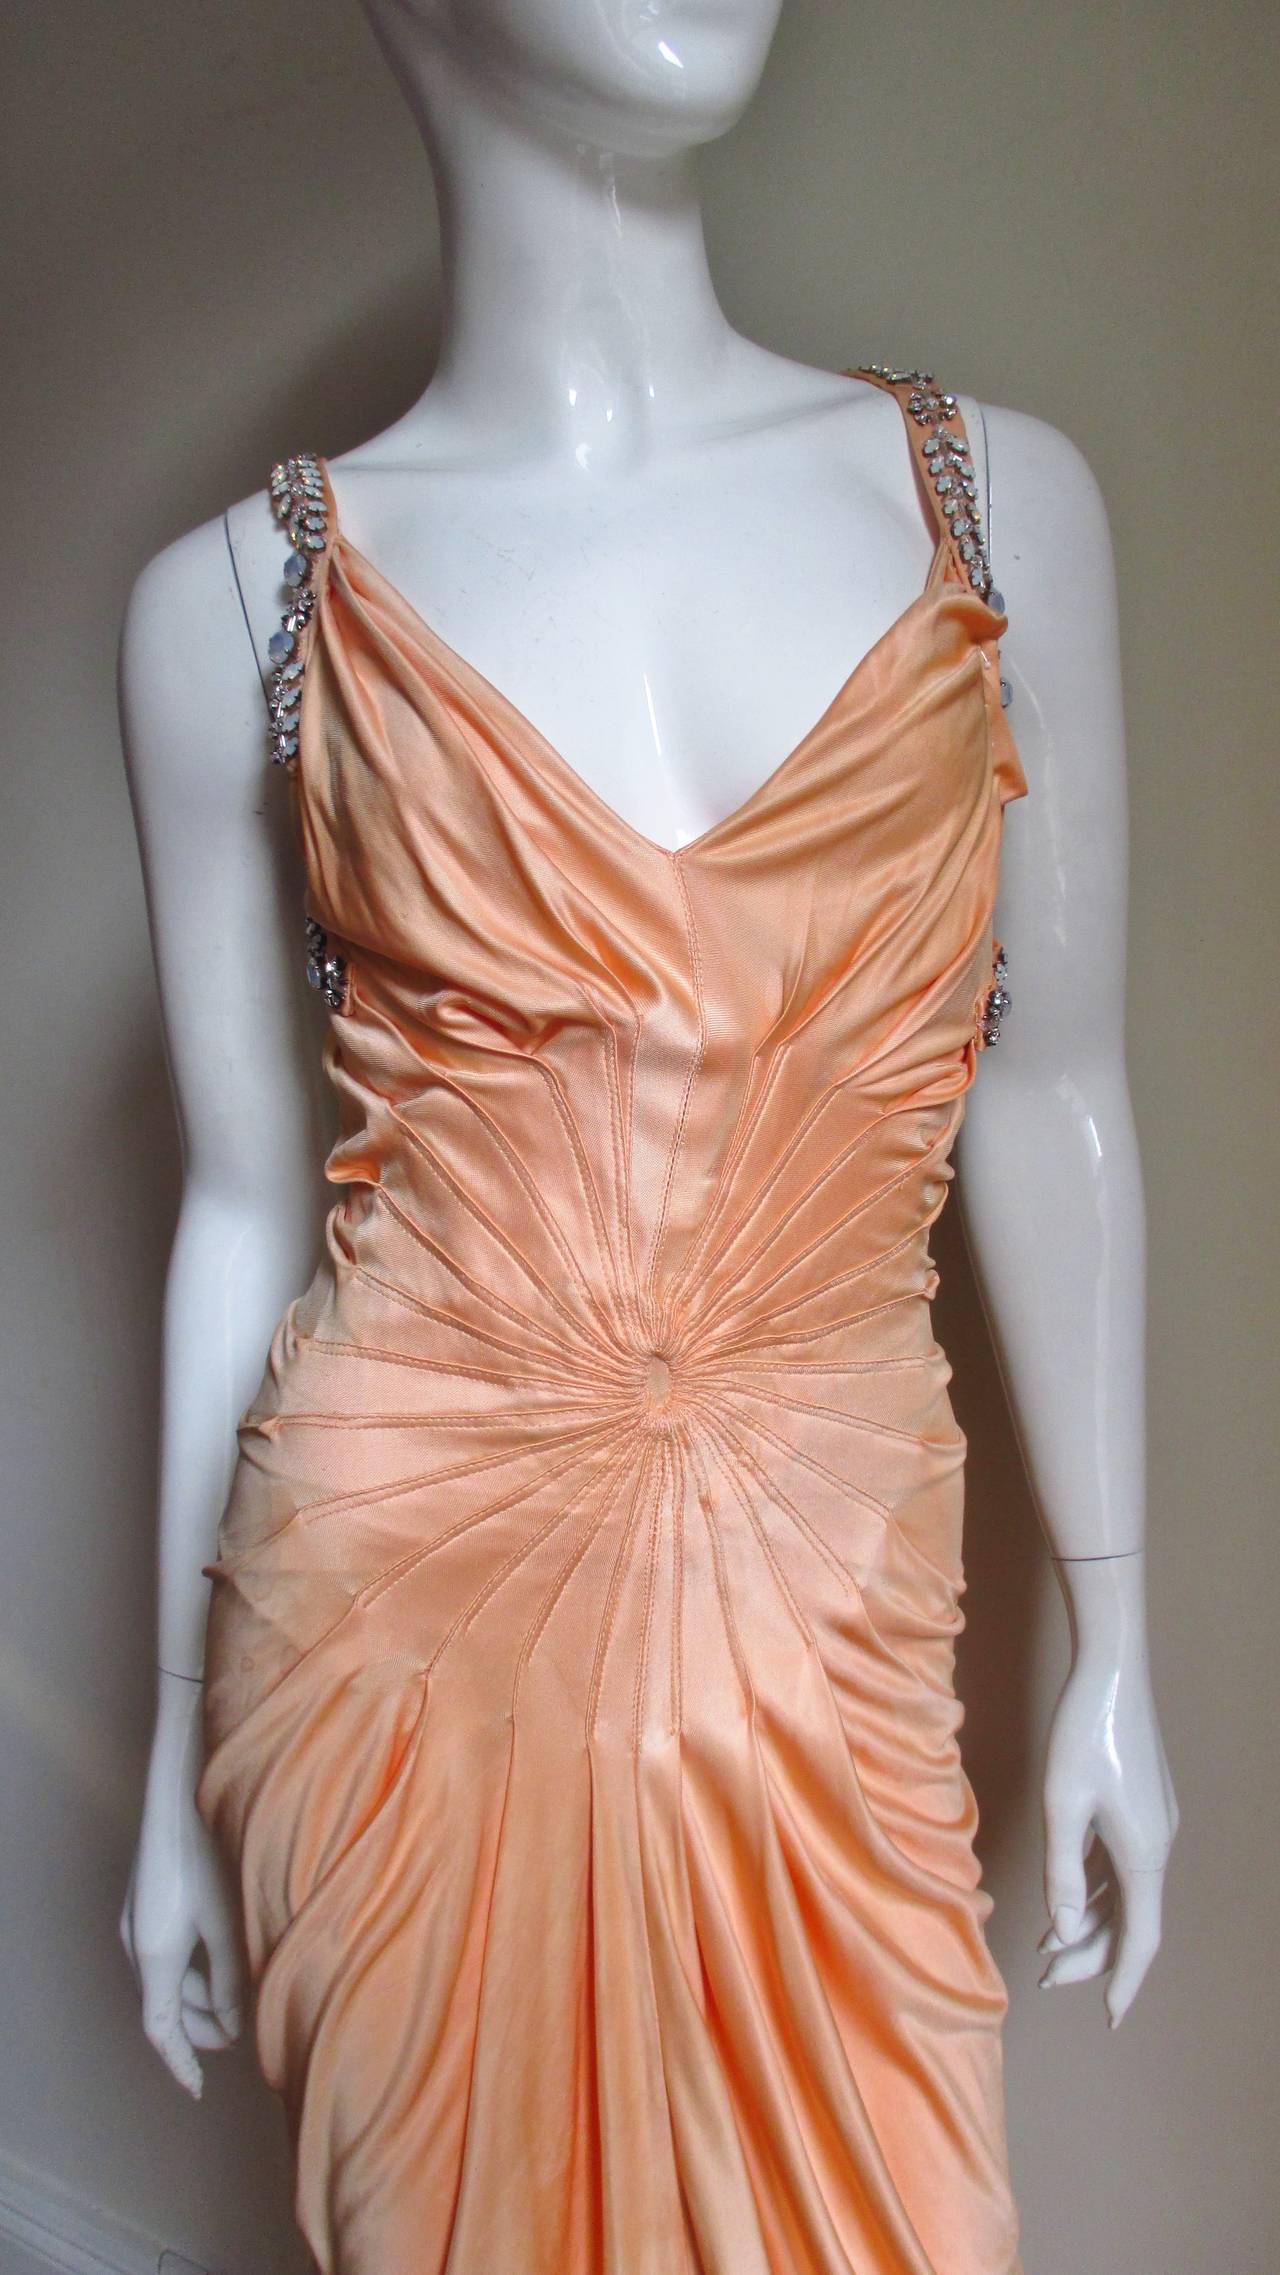 This is an amazing peach silk jersey gown from Gianni Versace.  It has gorgeous prong set rhinestones in flower and leave patterns along the shoulder straps which cross in the back and follow the armholes in the front.  There is a circular pattern